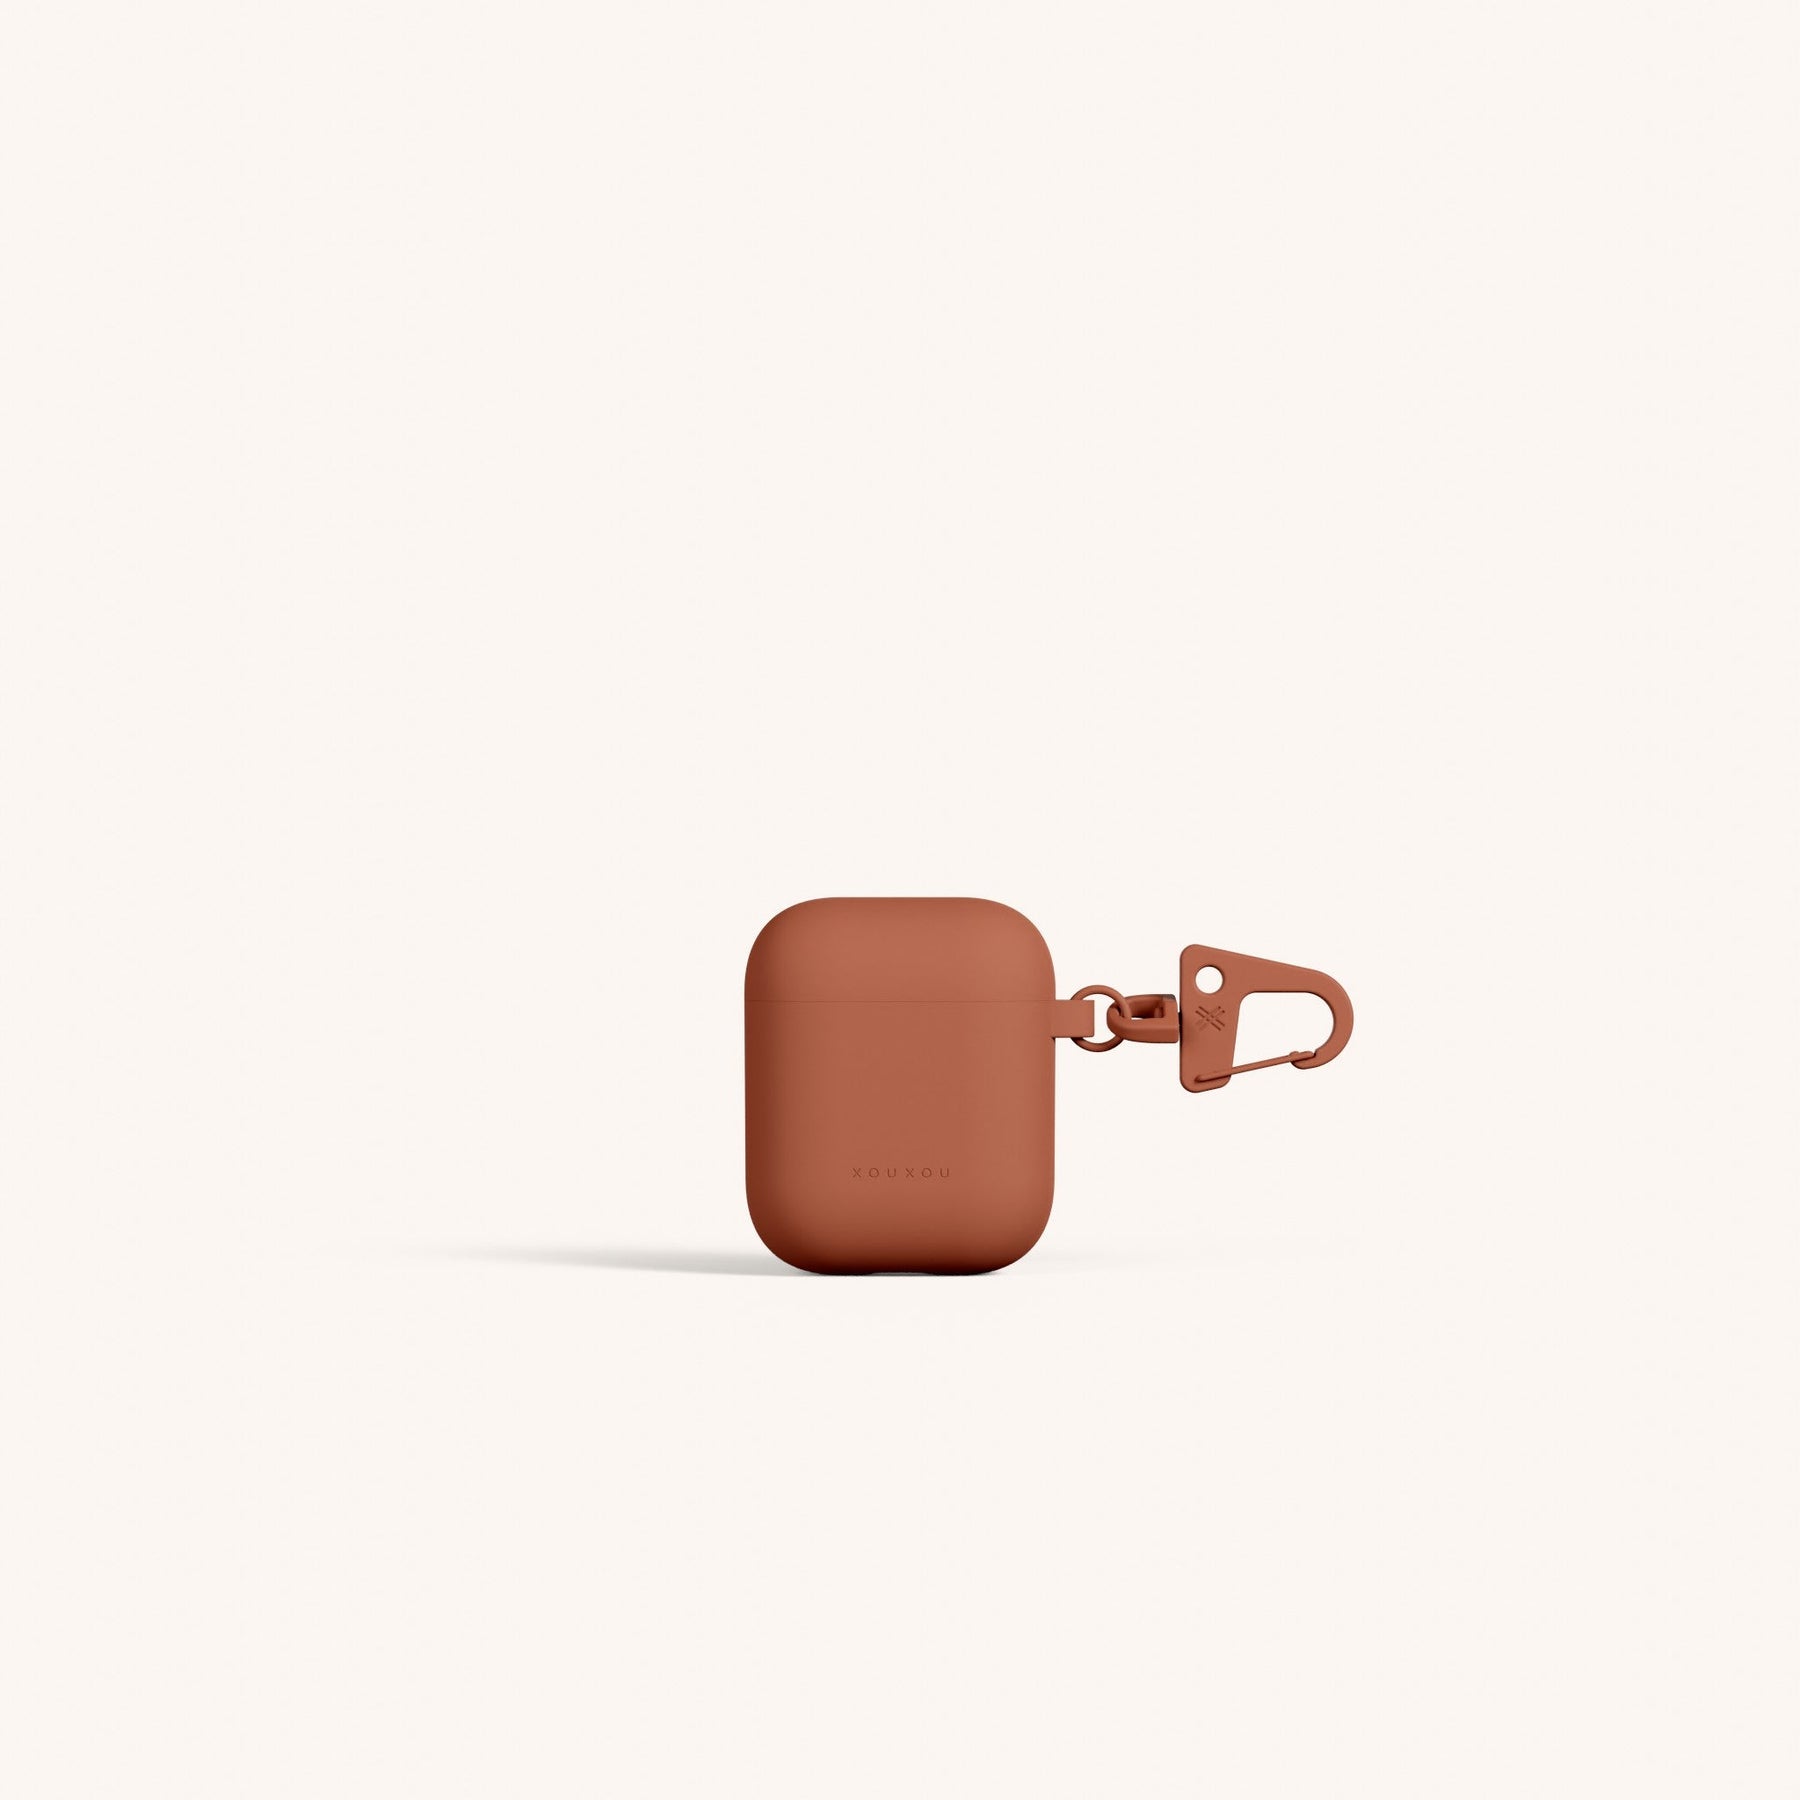 AirPods Case in Rusty Red